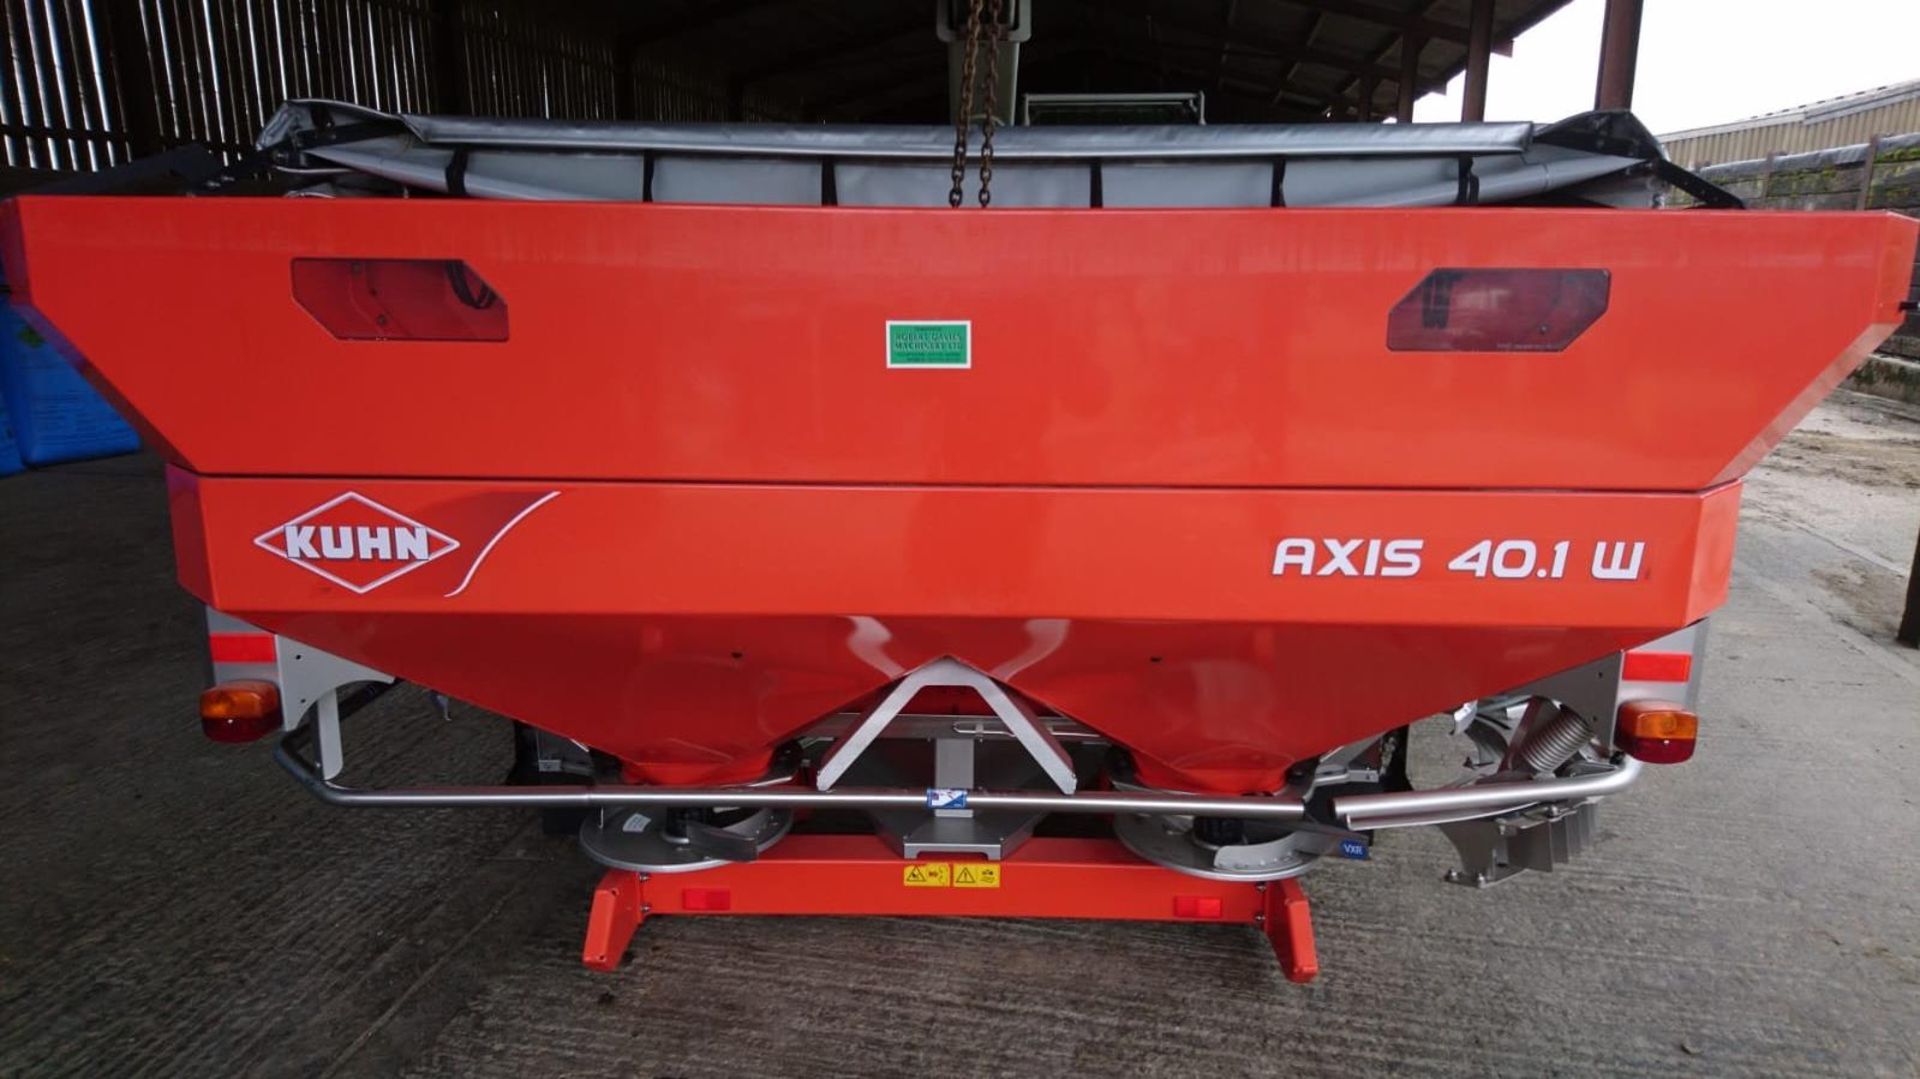 KUHN AXIS 40.1W FERTILISER SPINNER WITH WEIGHT CELLS 2010 - Image 3 of 3